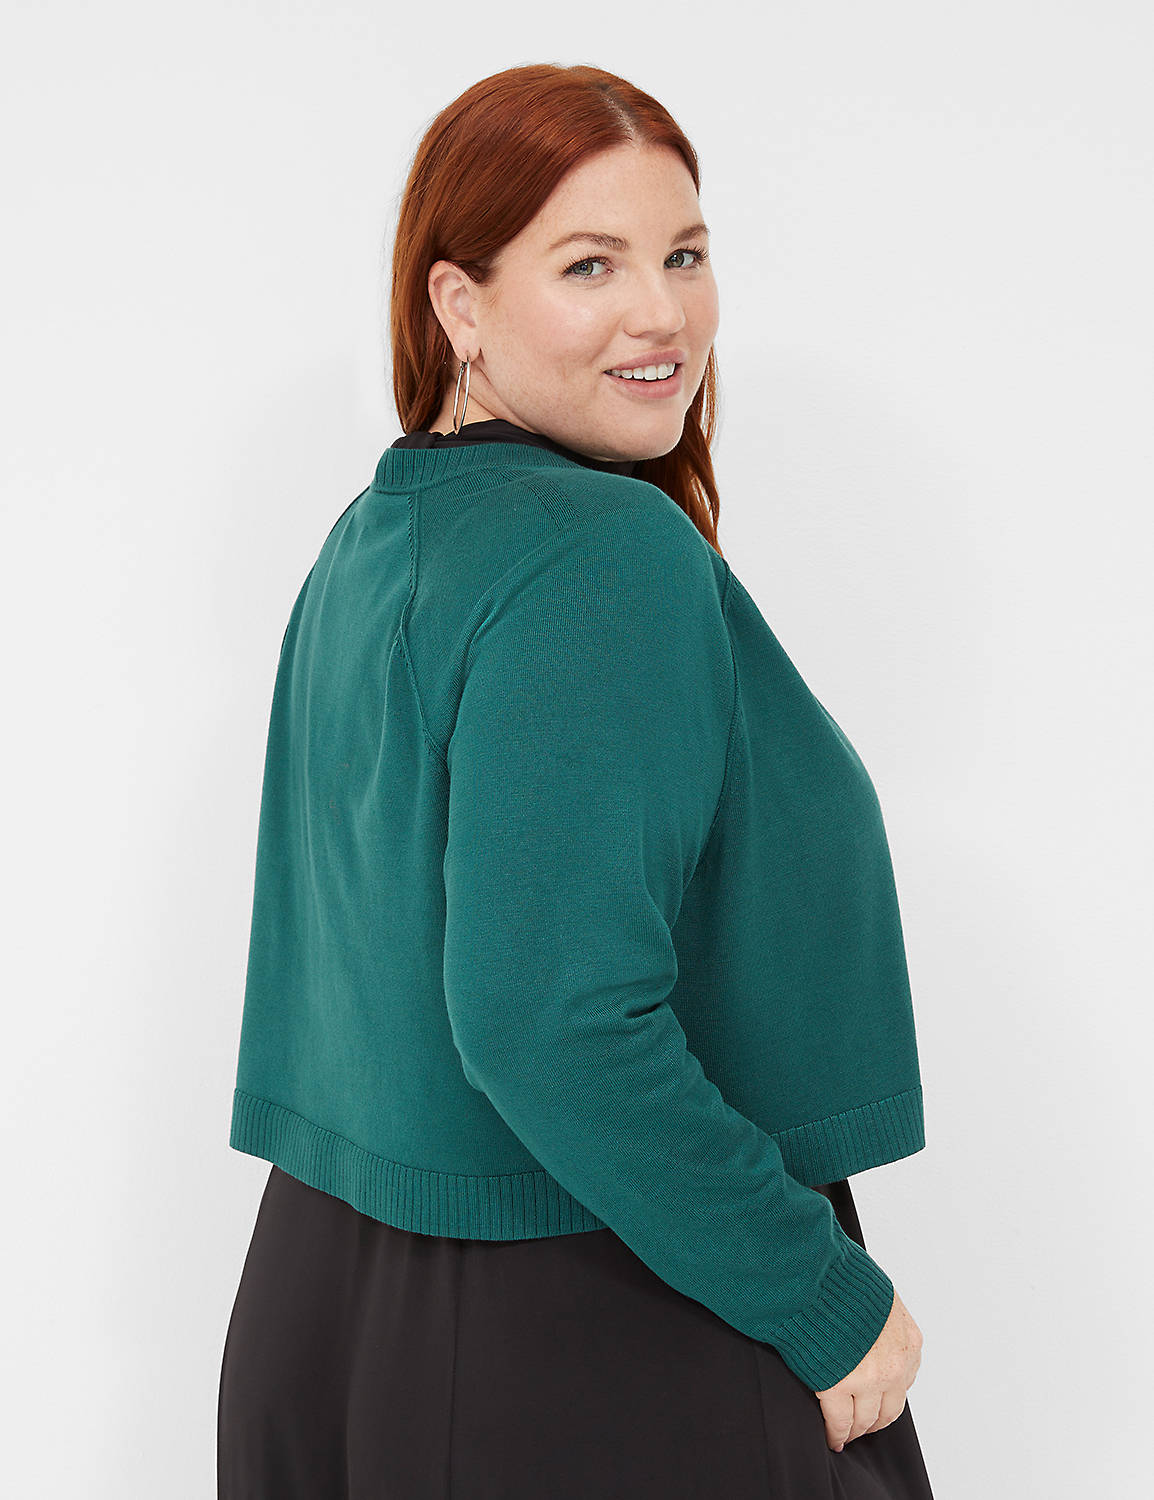 Classic Long Sleeve Open Front Shru Product Image 2